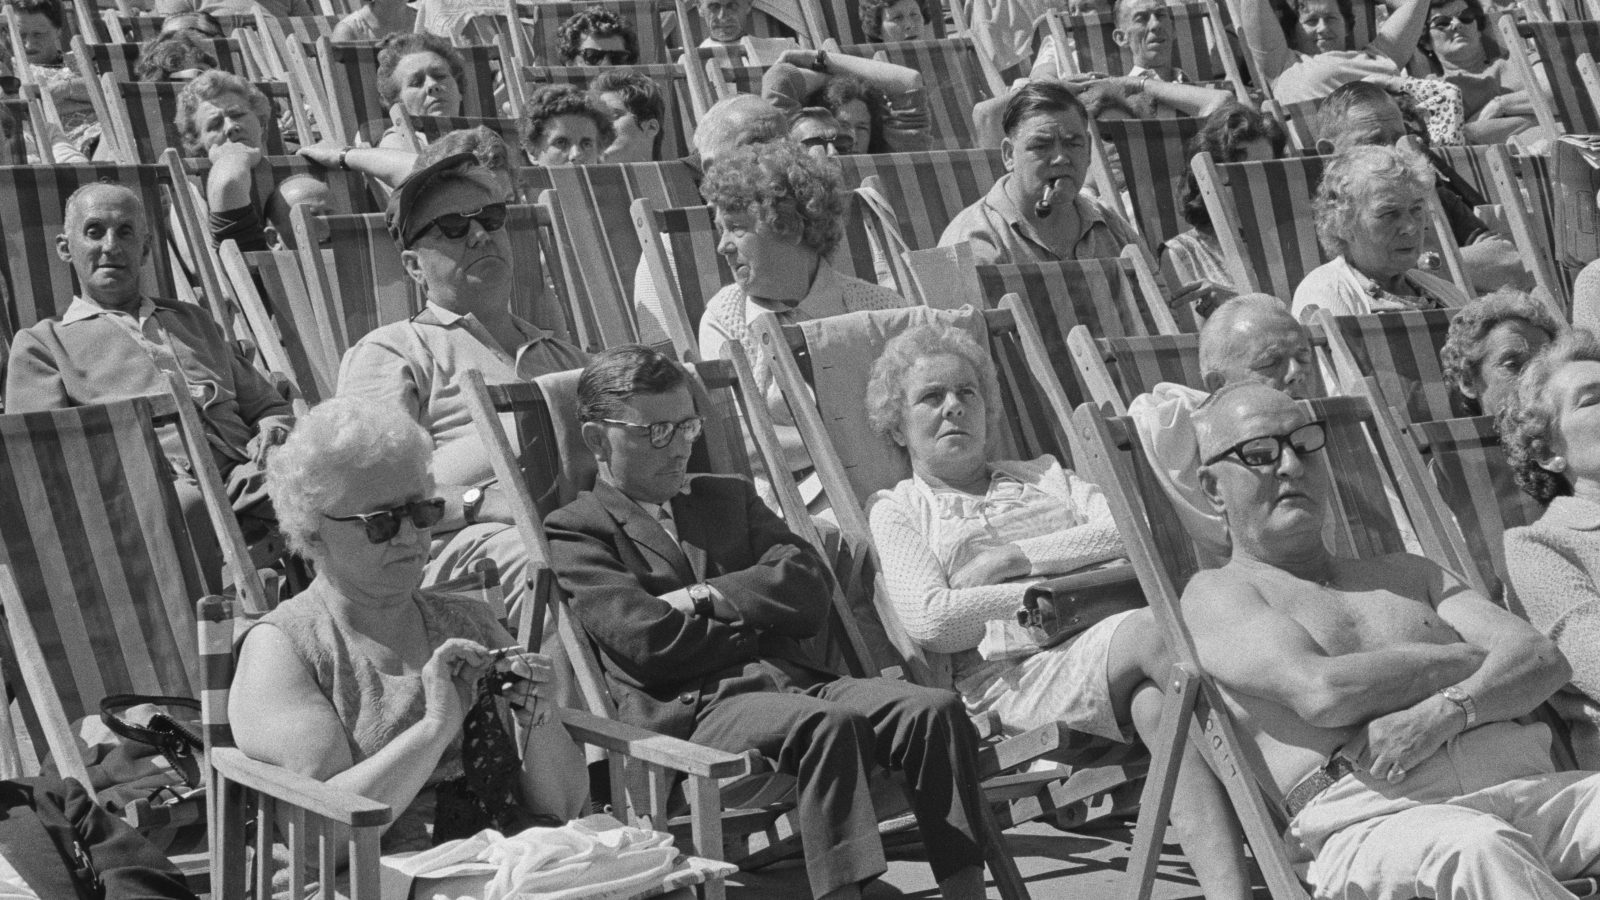 Black and white photo of rows of seniors in deckchairs in Margate, UK.